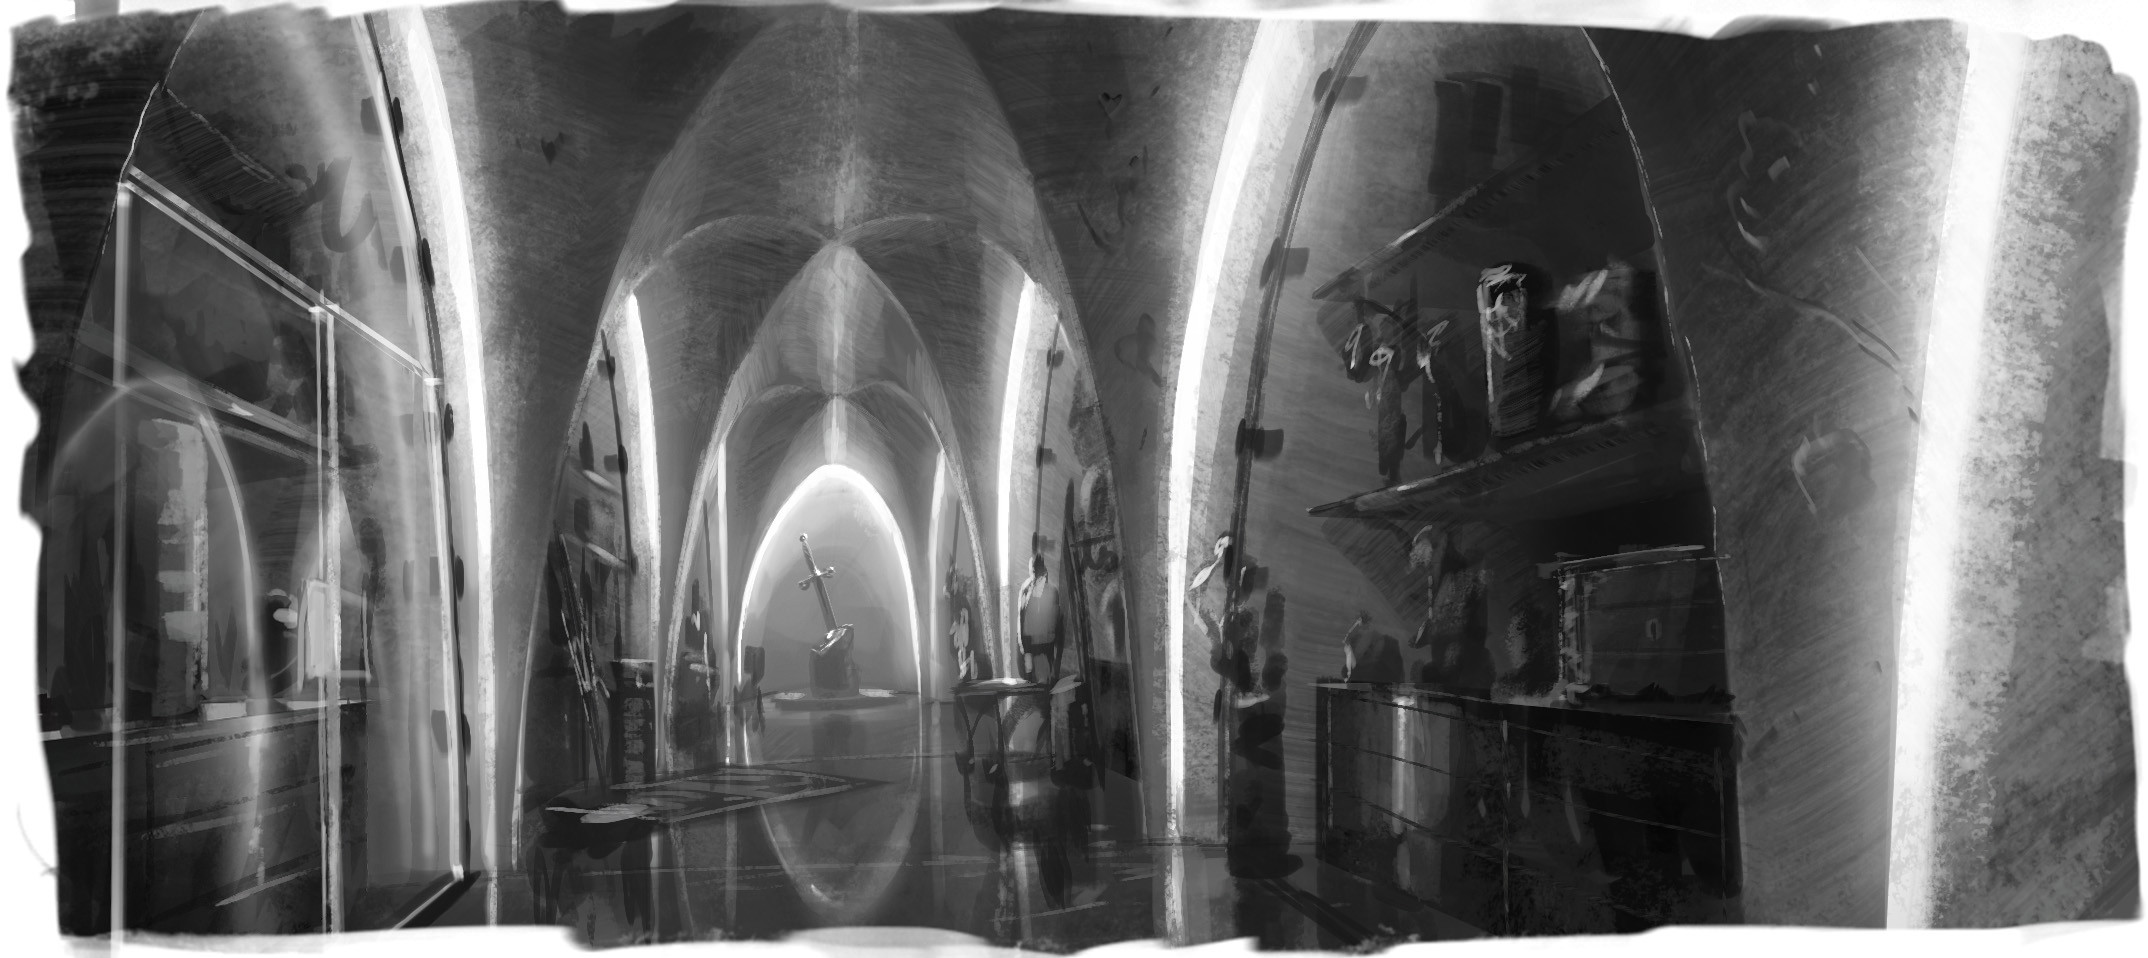 A sketch for the vault of precious and dangerous artifacts. Trying to combine the medieval with the modern.